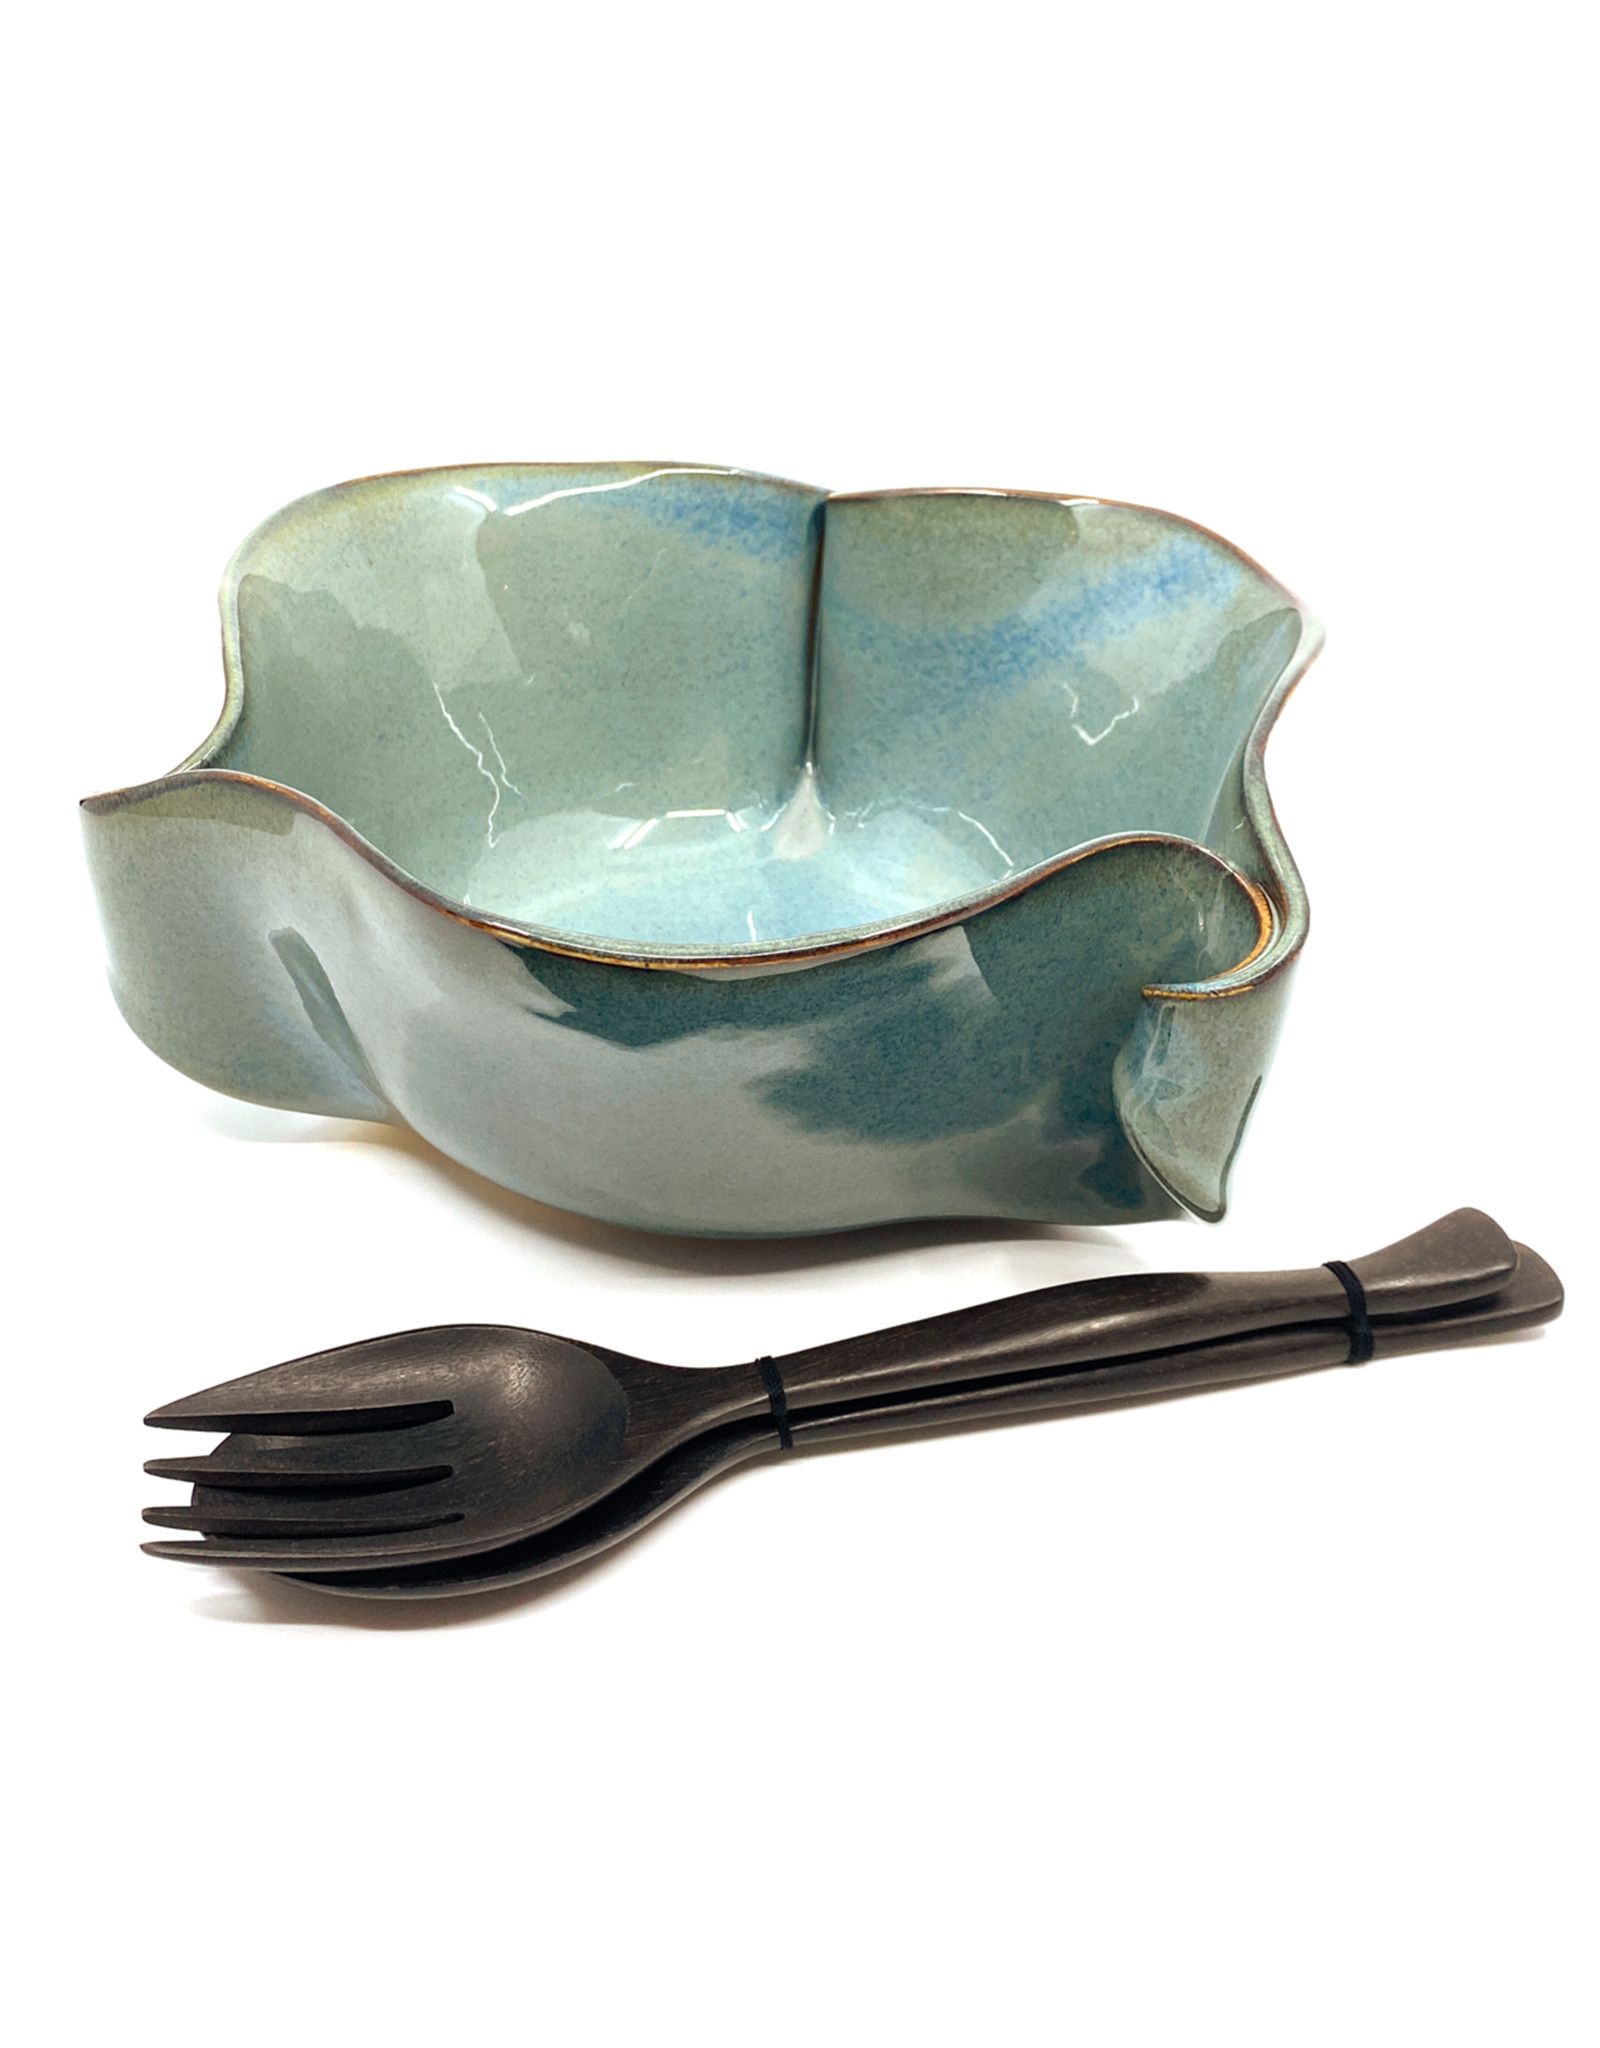 HILBORN POTTERY LARGE BLUE MEDLEY CURLY BOWL WITH SERVERS